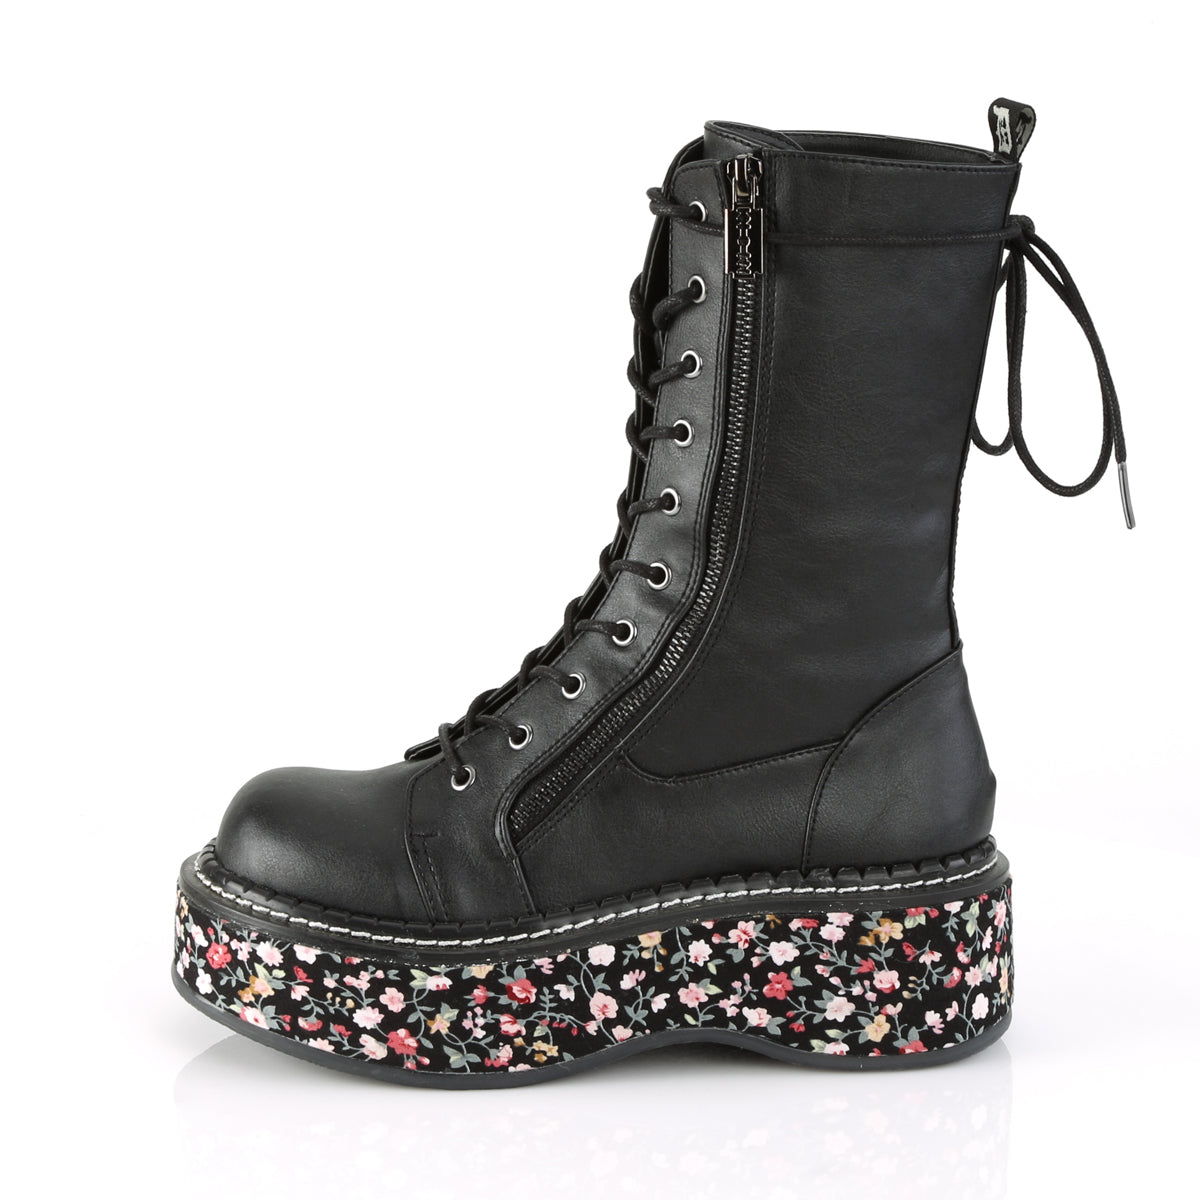 DemoniaCult Womens Boots EMILY-350 Blk Vegan Leather-Floral Fabric